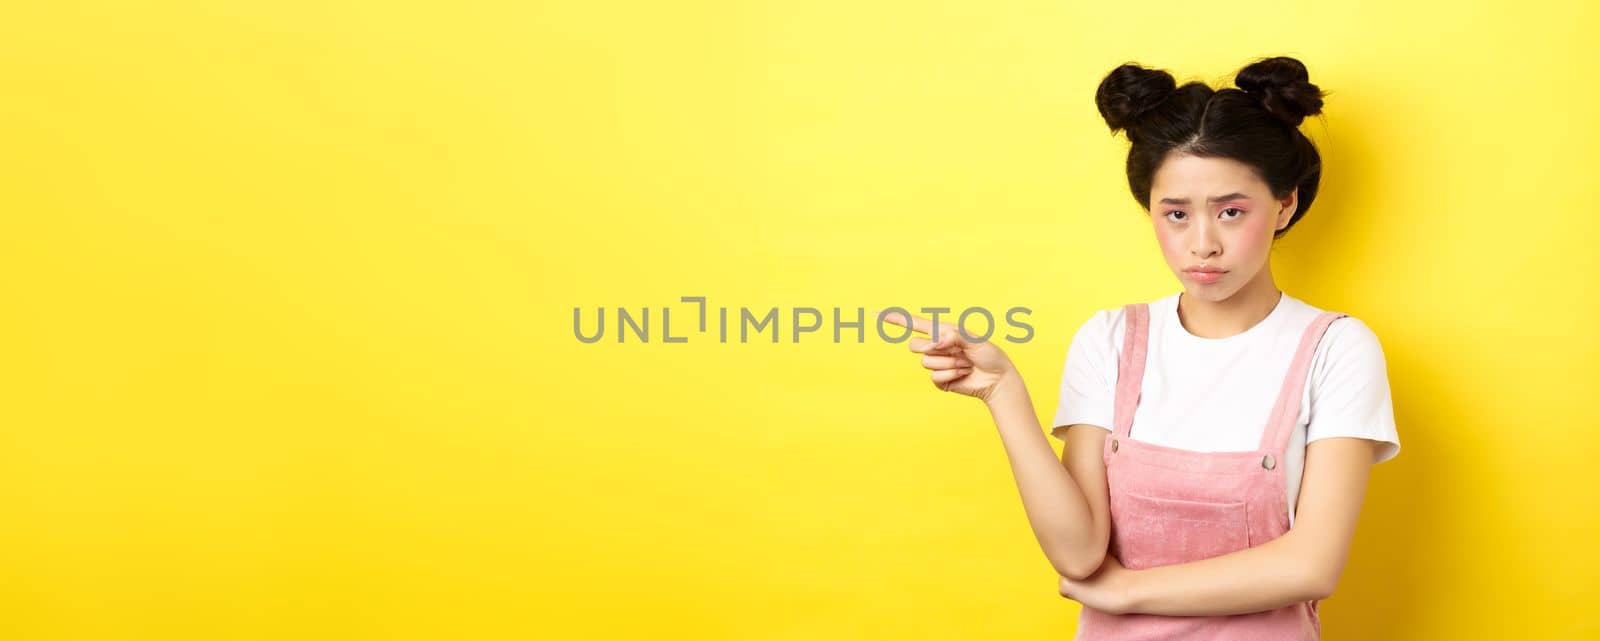 Sad and gloomy asian girl with glamour makeup, frowning unfair and pointing left at logo, looking disappointed, standing on yellow background.